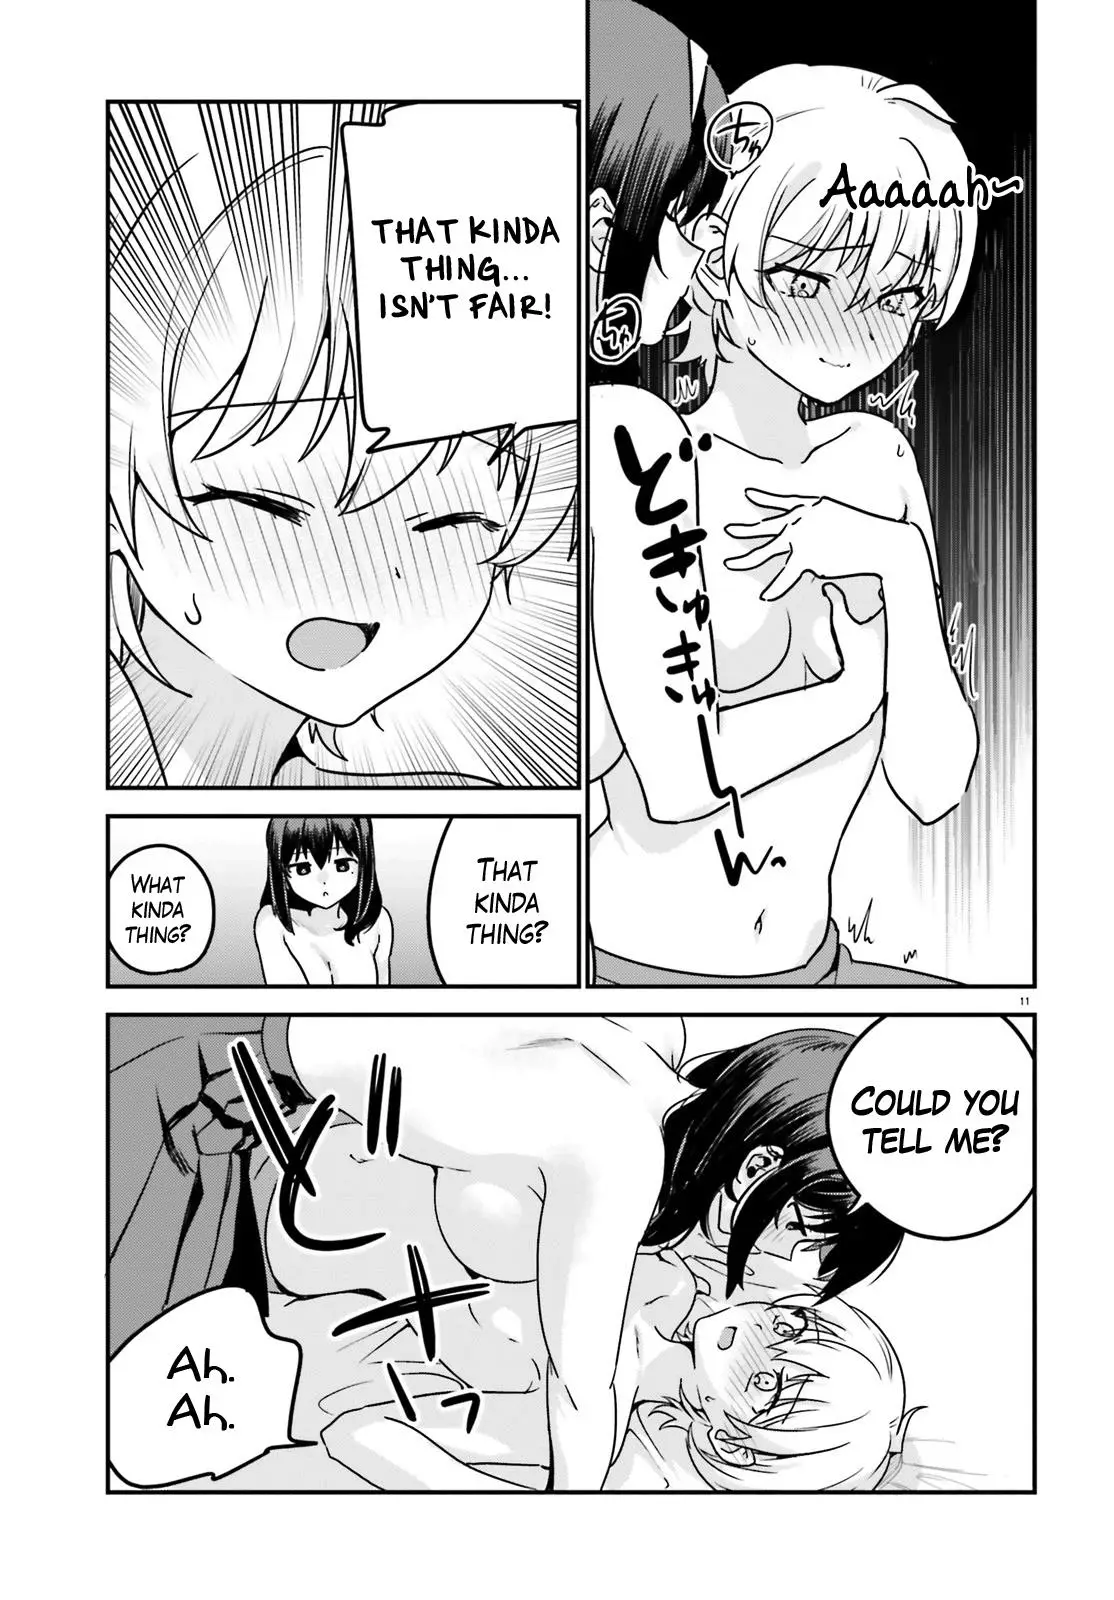 I Like Oppai Best In The World! - 69 page 11-396ee79a